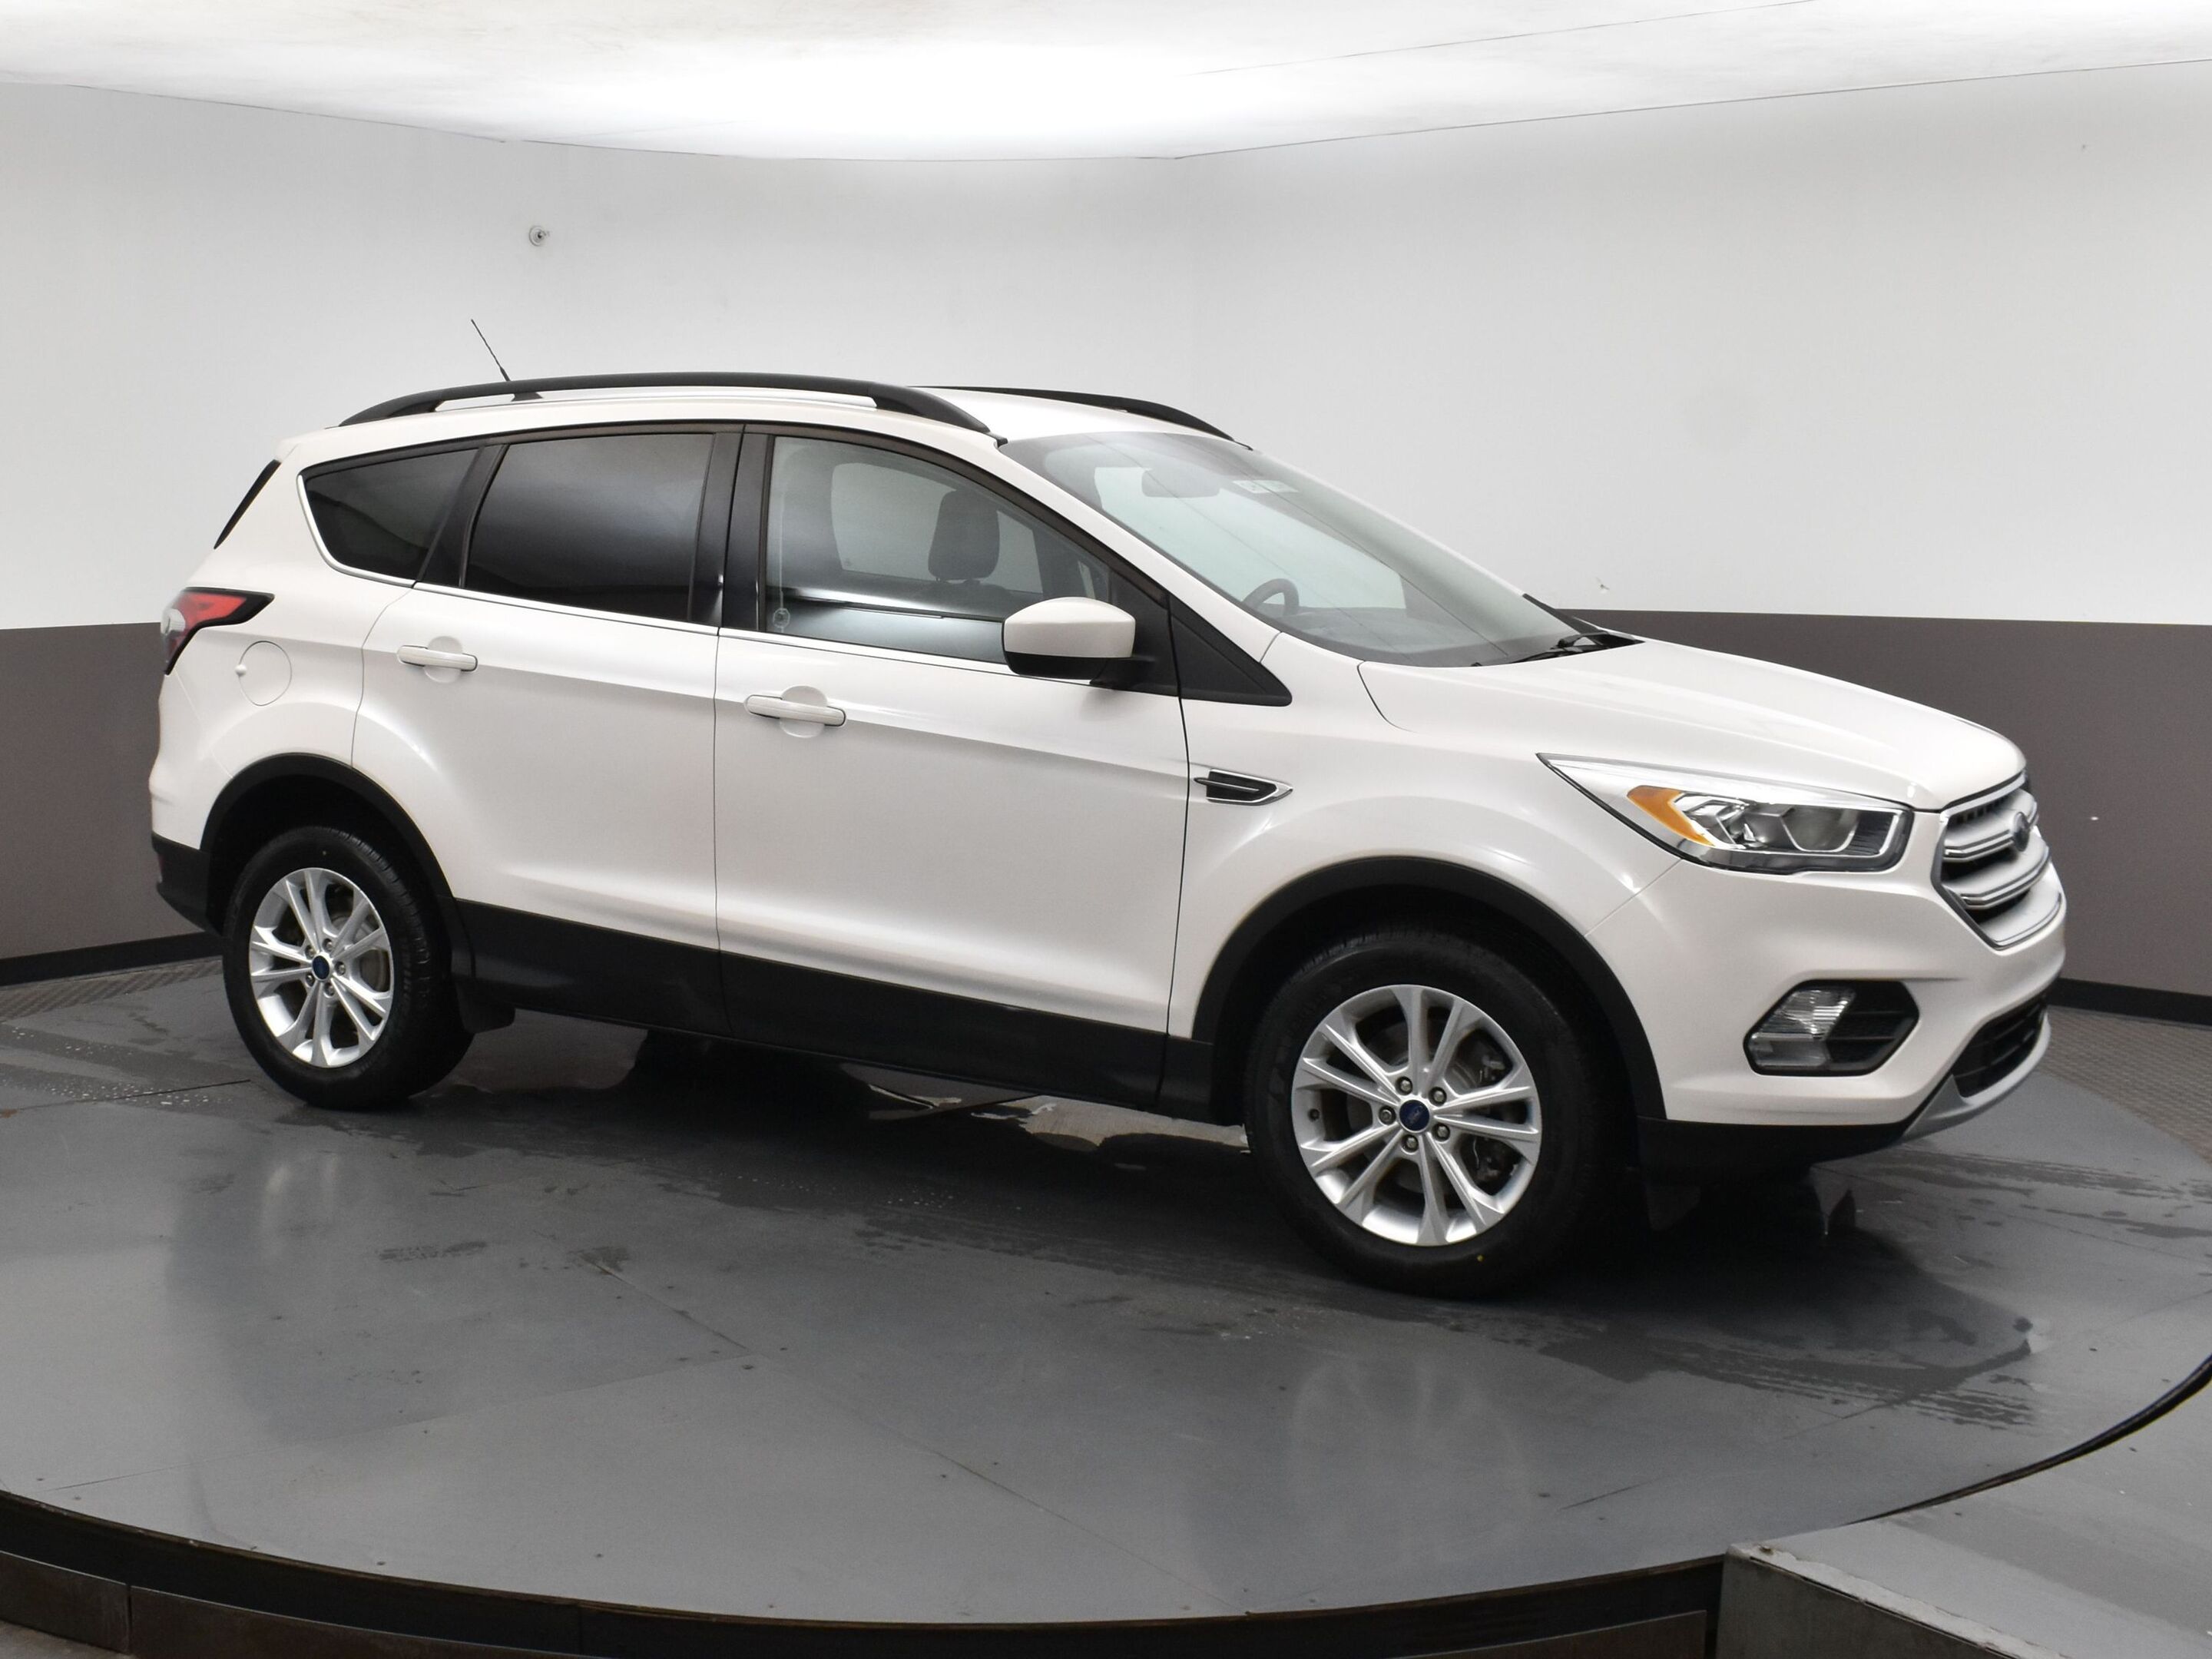 2018 Ford Escape One Owner & Fully Certified SEL AWD, Leather, Allo